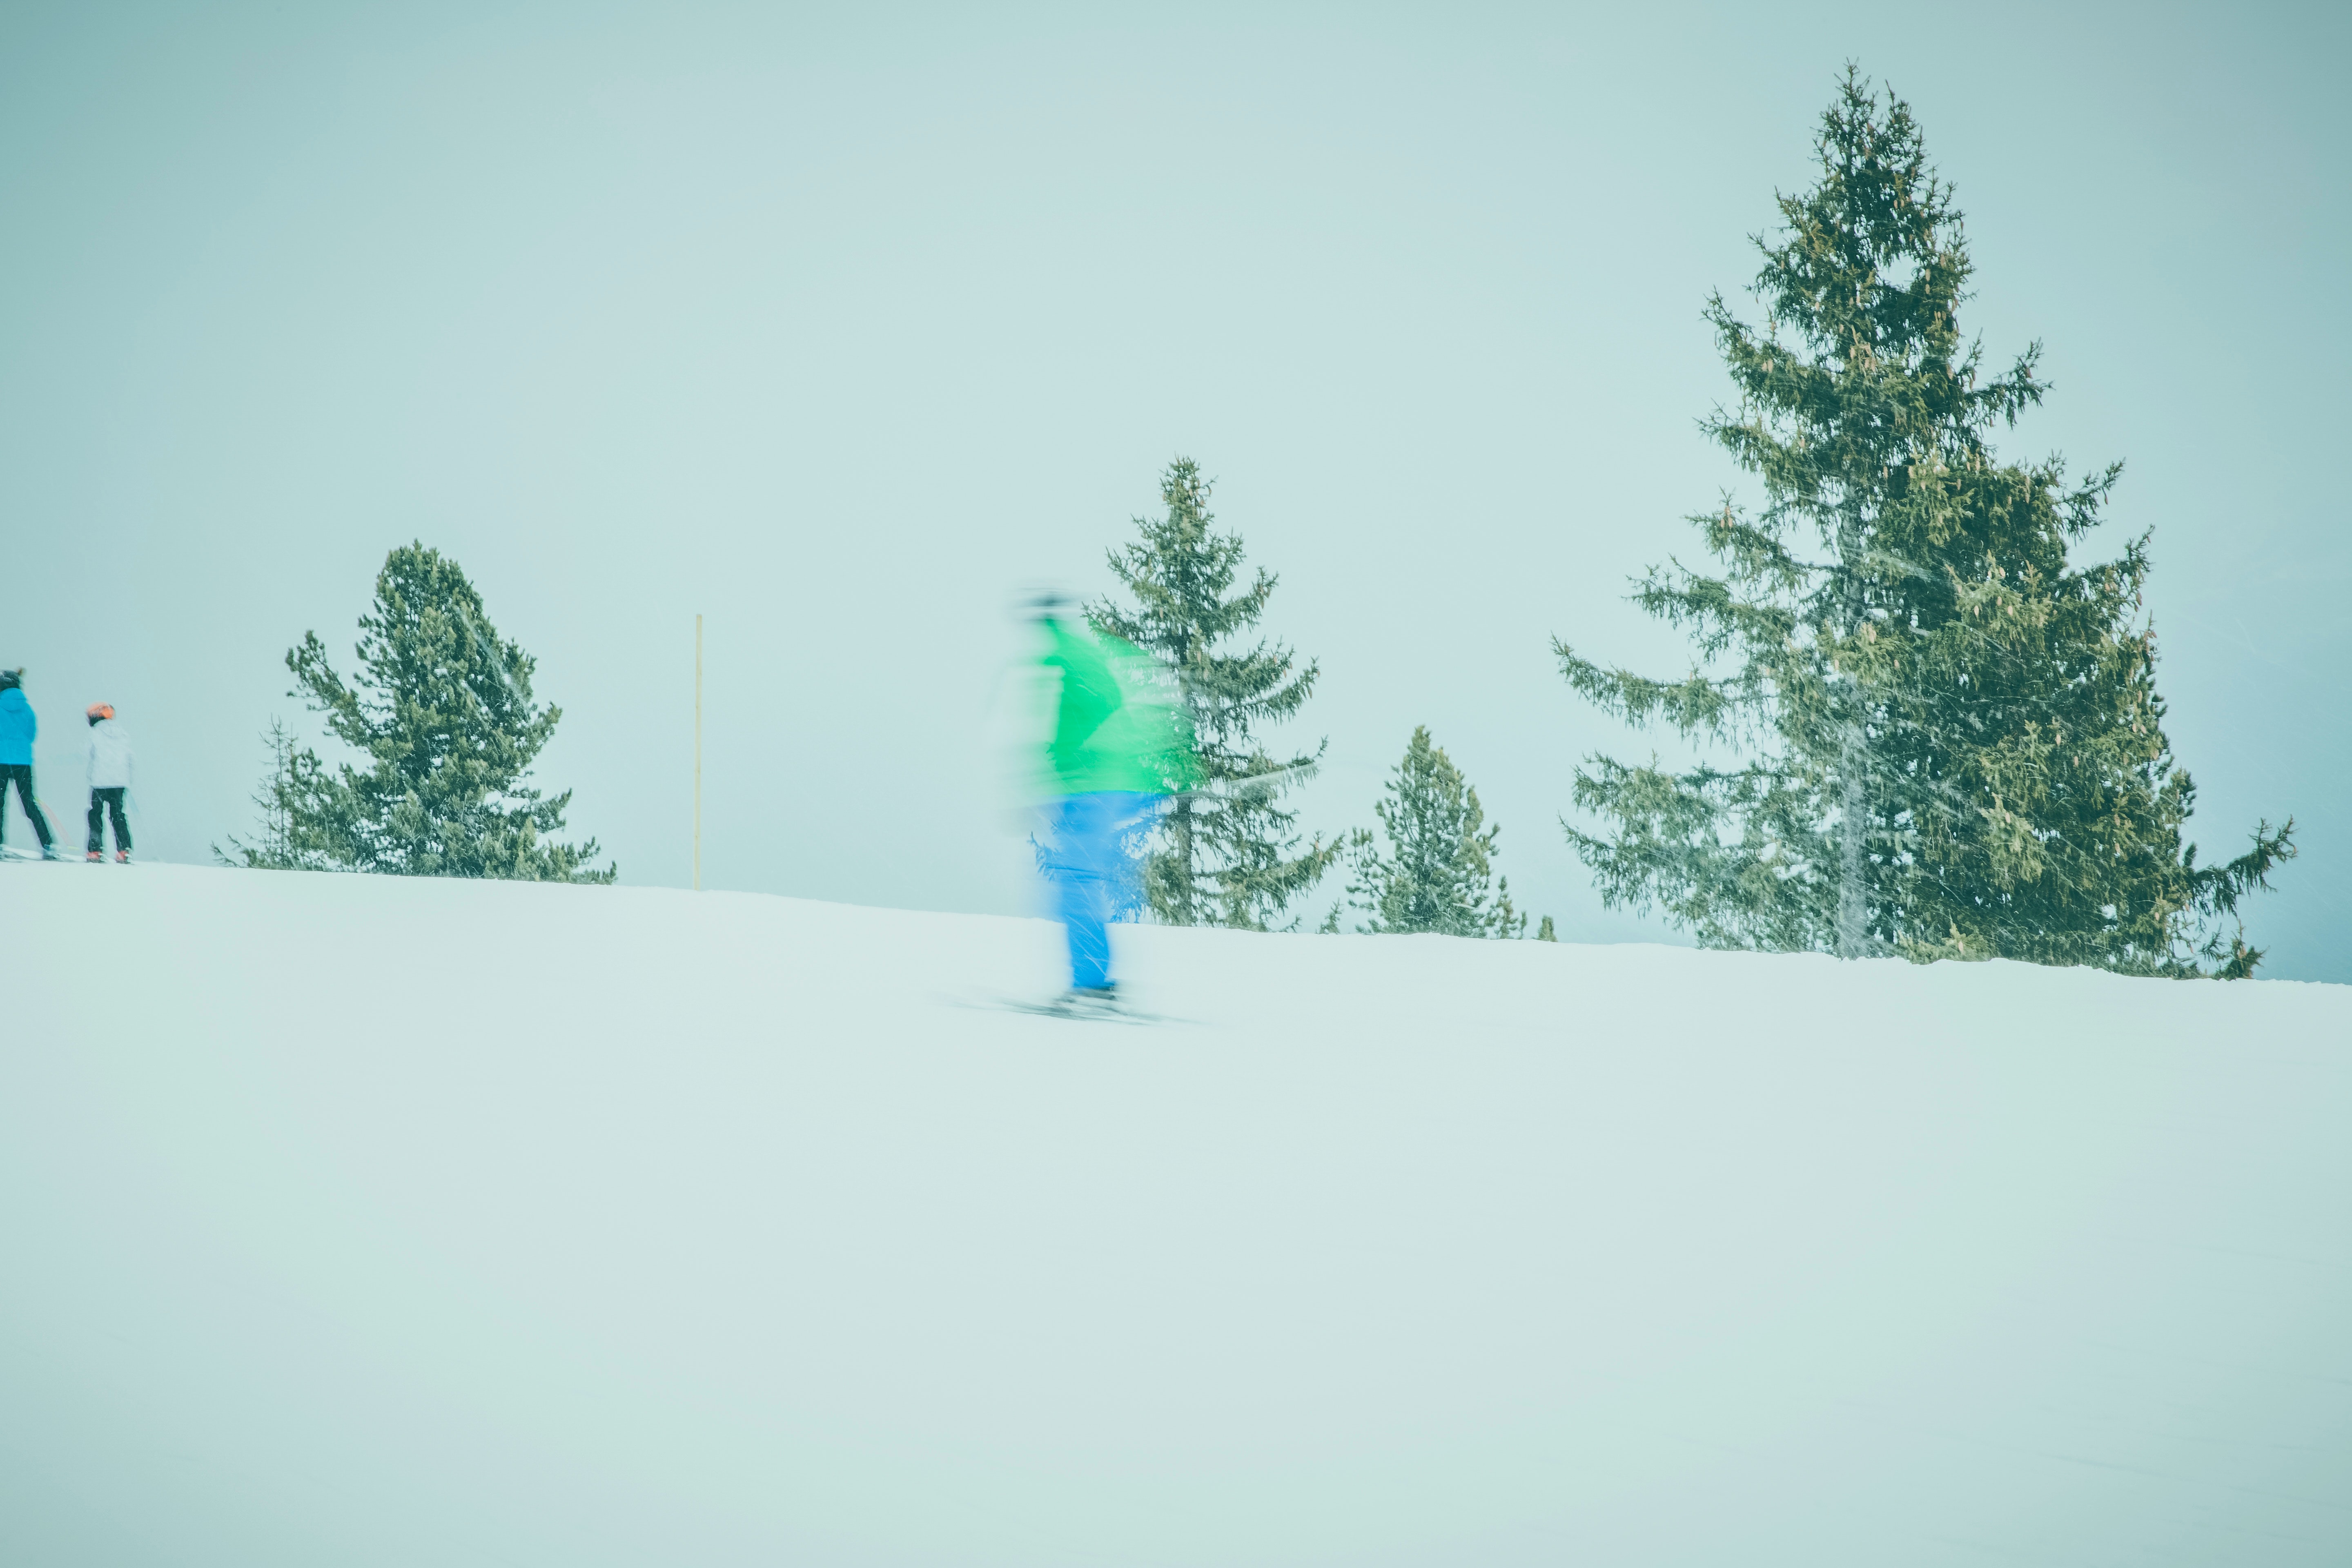 Human in Blue Pants Riding Ski Board, Adventure, Cold, Outdoors, Skiing, HQ Photo